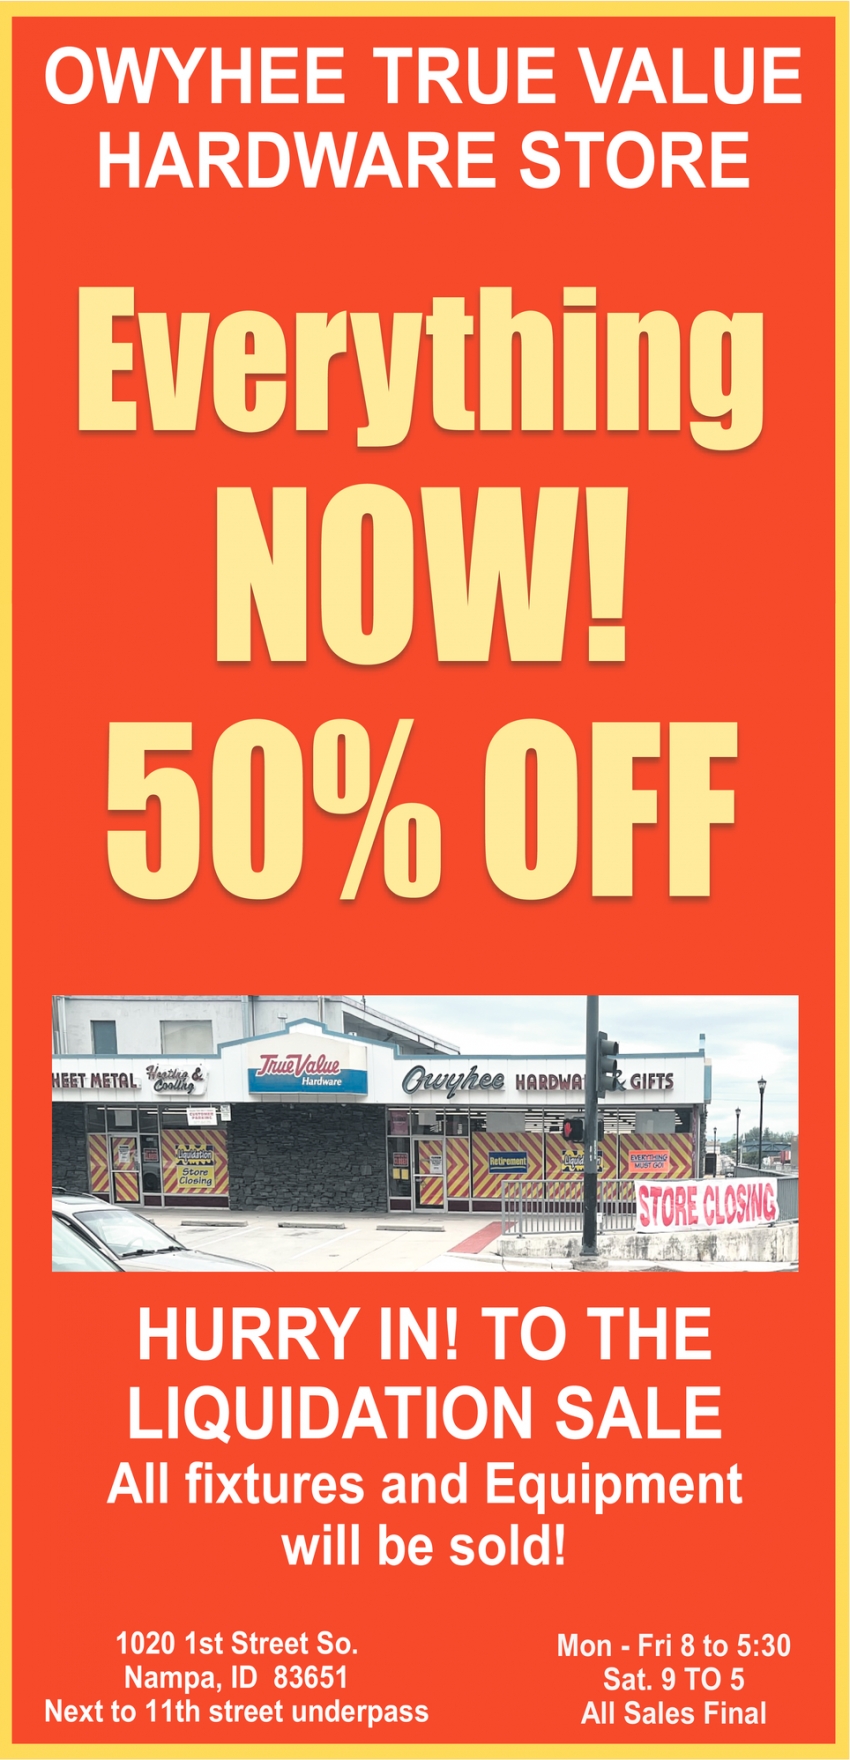 Everything New! 50% Off